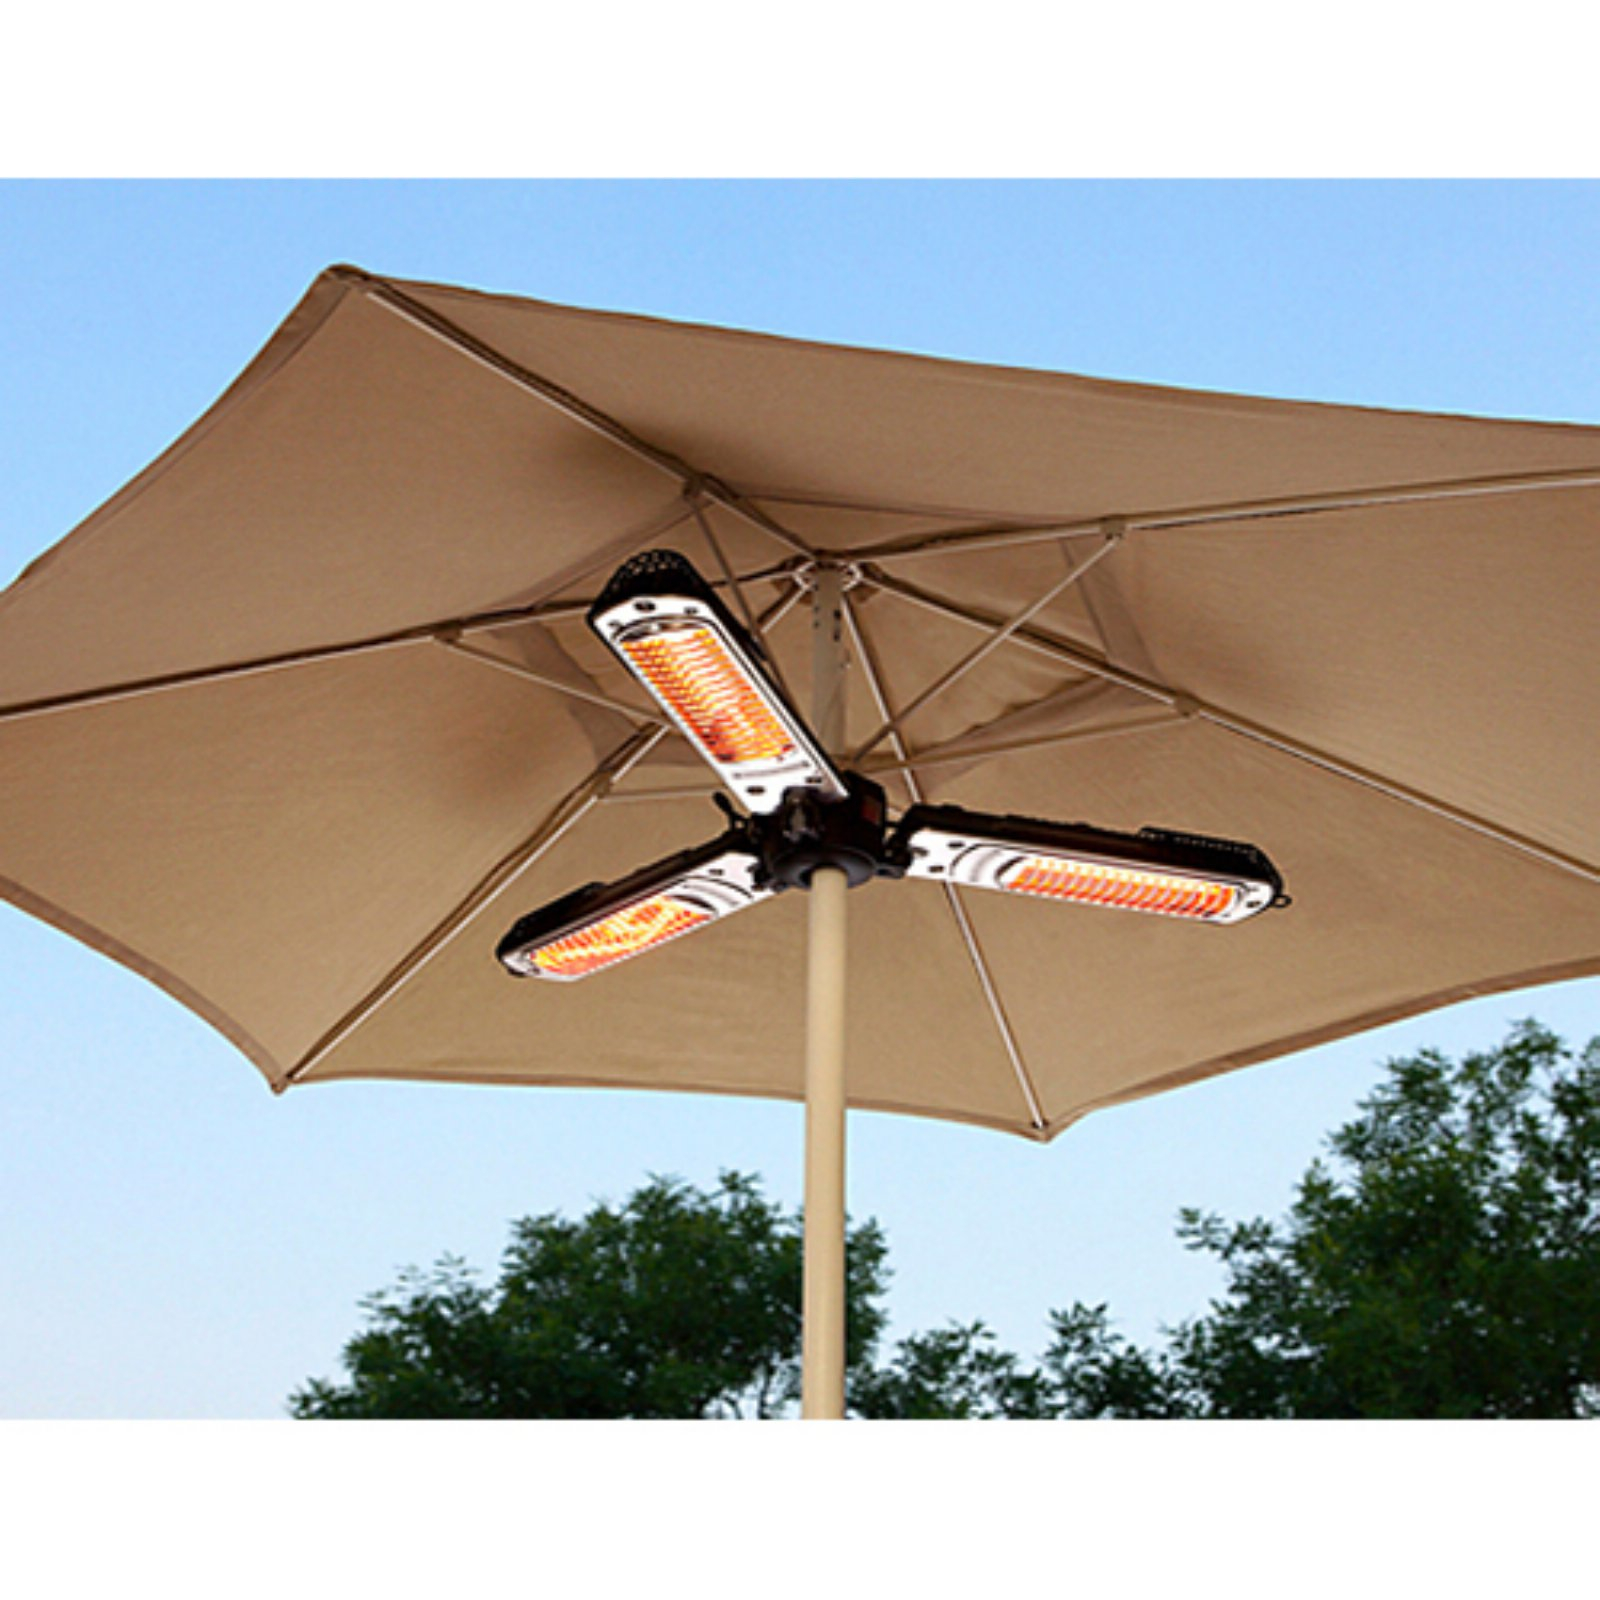 Hiland Parasol Electric Patio Heater Walmart with regard to proportions 1600 X 1600